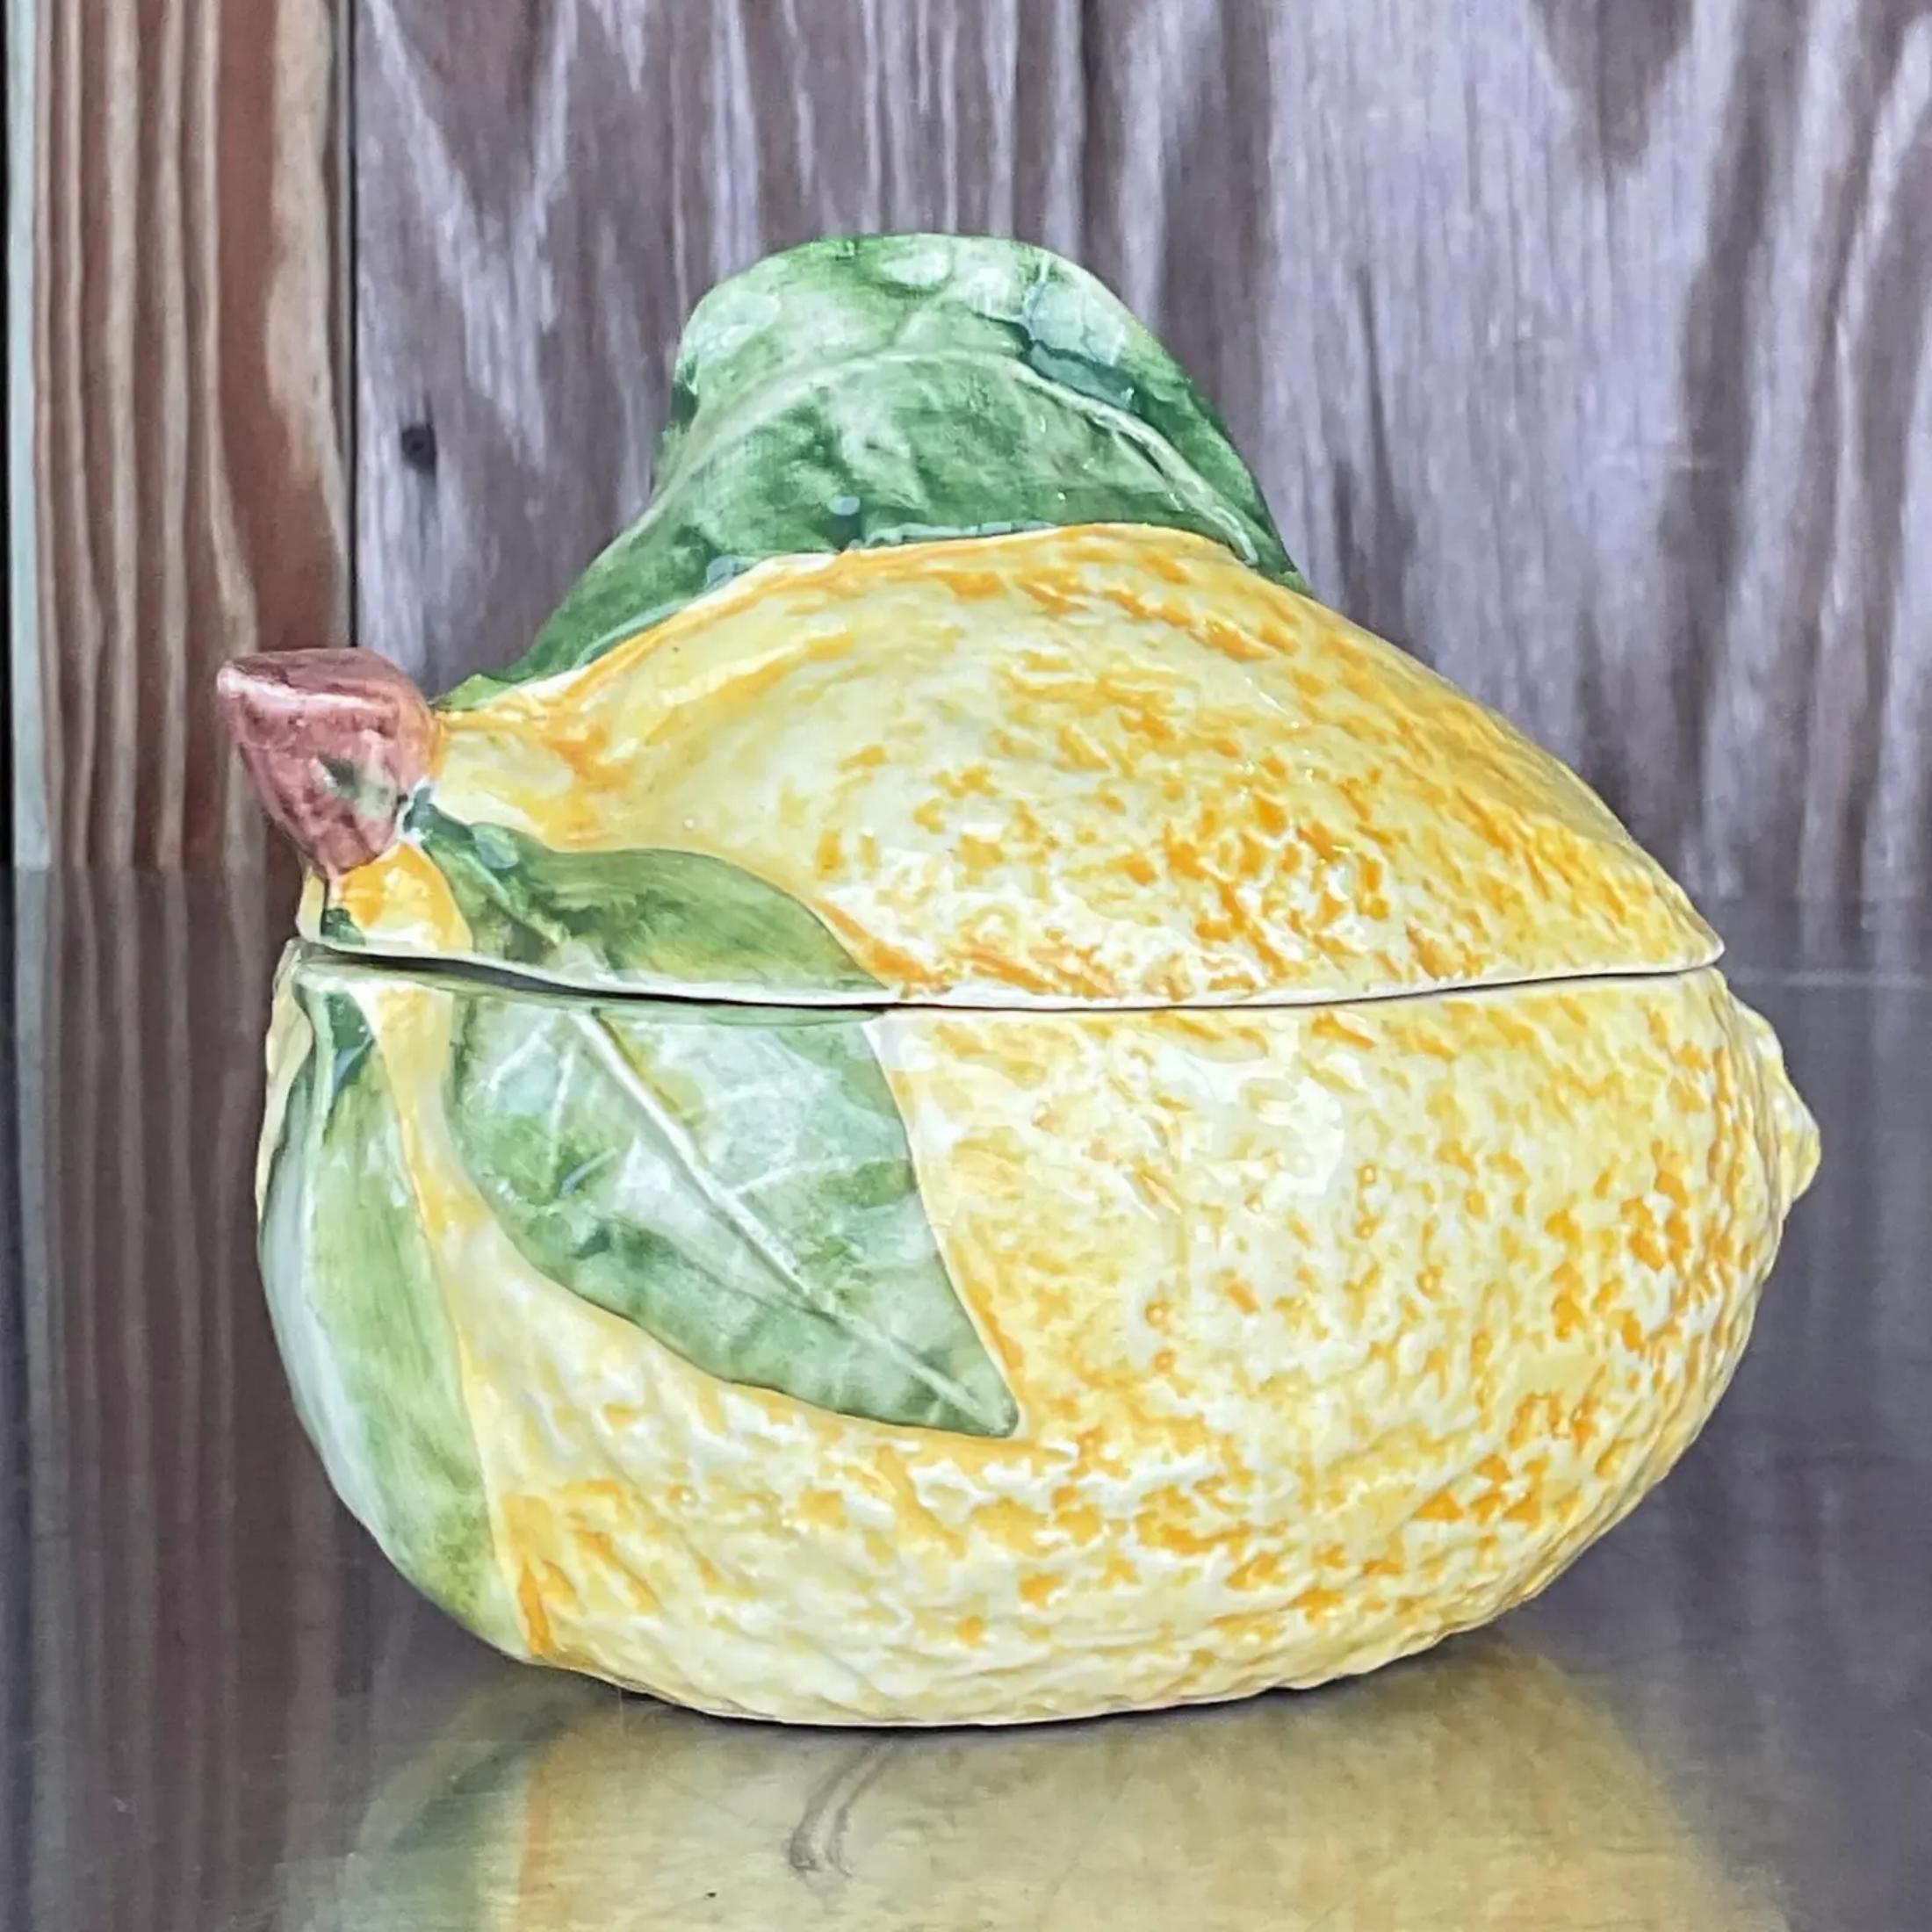 A fabulous vintage Coastal lidded bowl. A giant lemon in a glazed ceramic finish. Made in Italy and marked on the bottom. Acquired from a Palm Beach estate.